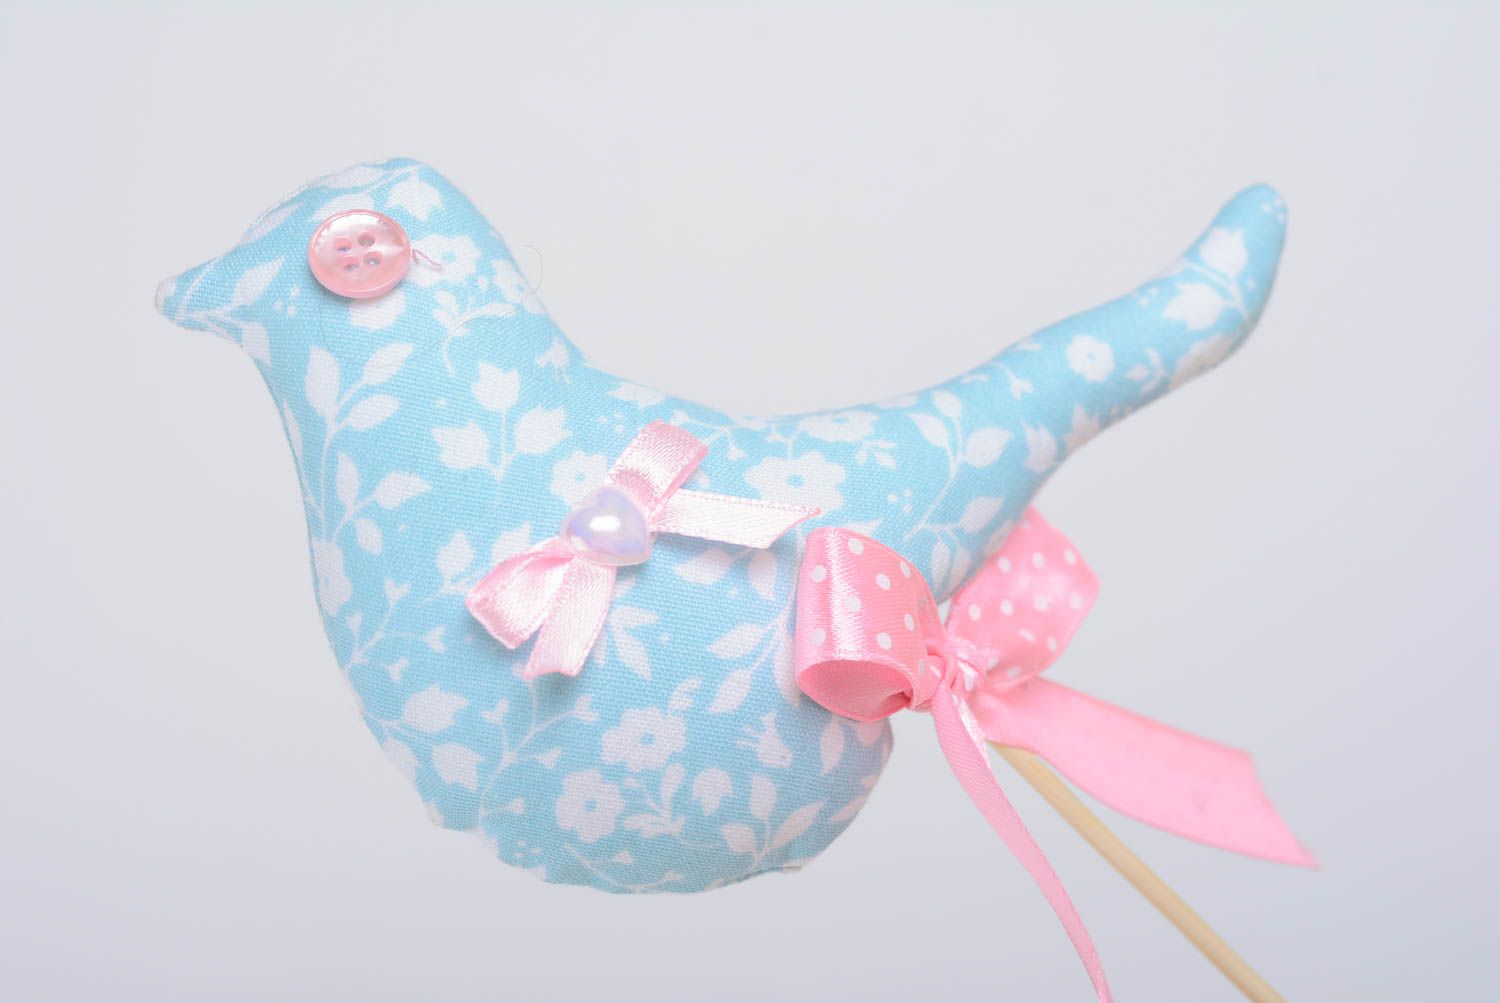 Toy on stick for flower pots decoration blue bird with a pink bow hand made photo 2